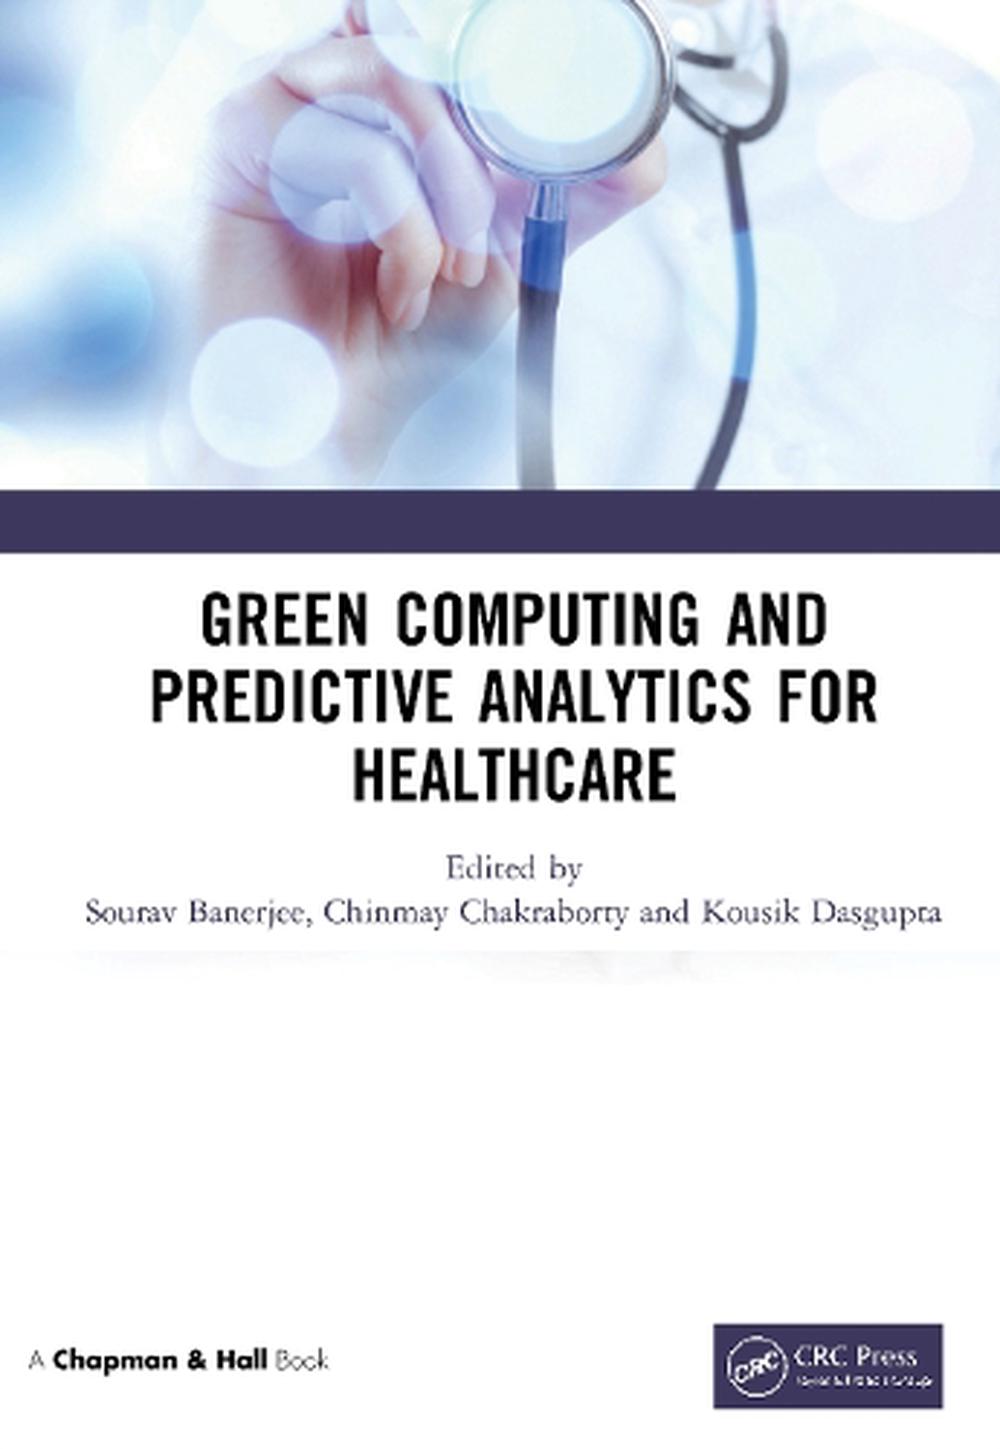 Green Computing and Predictive Analytics for Healthcare ...